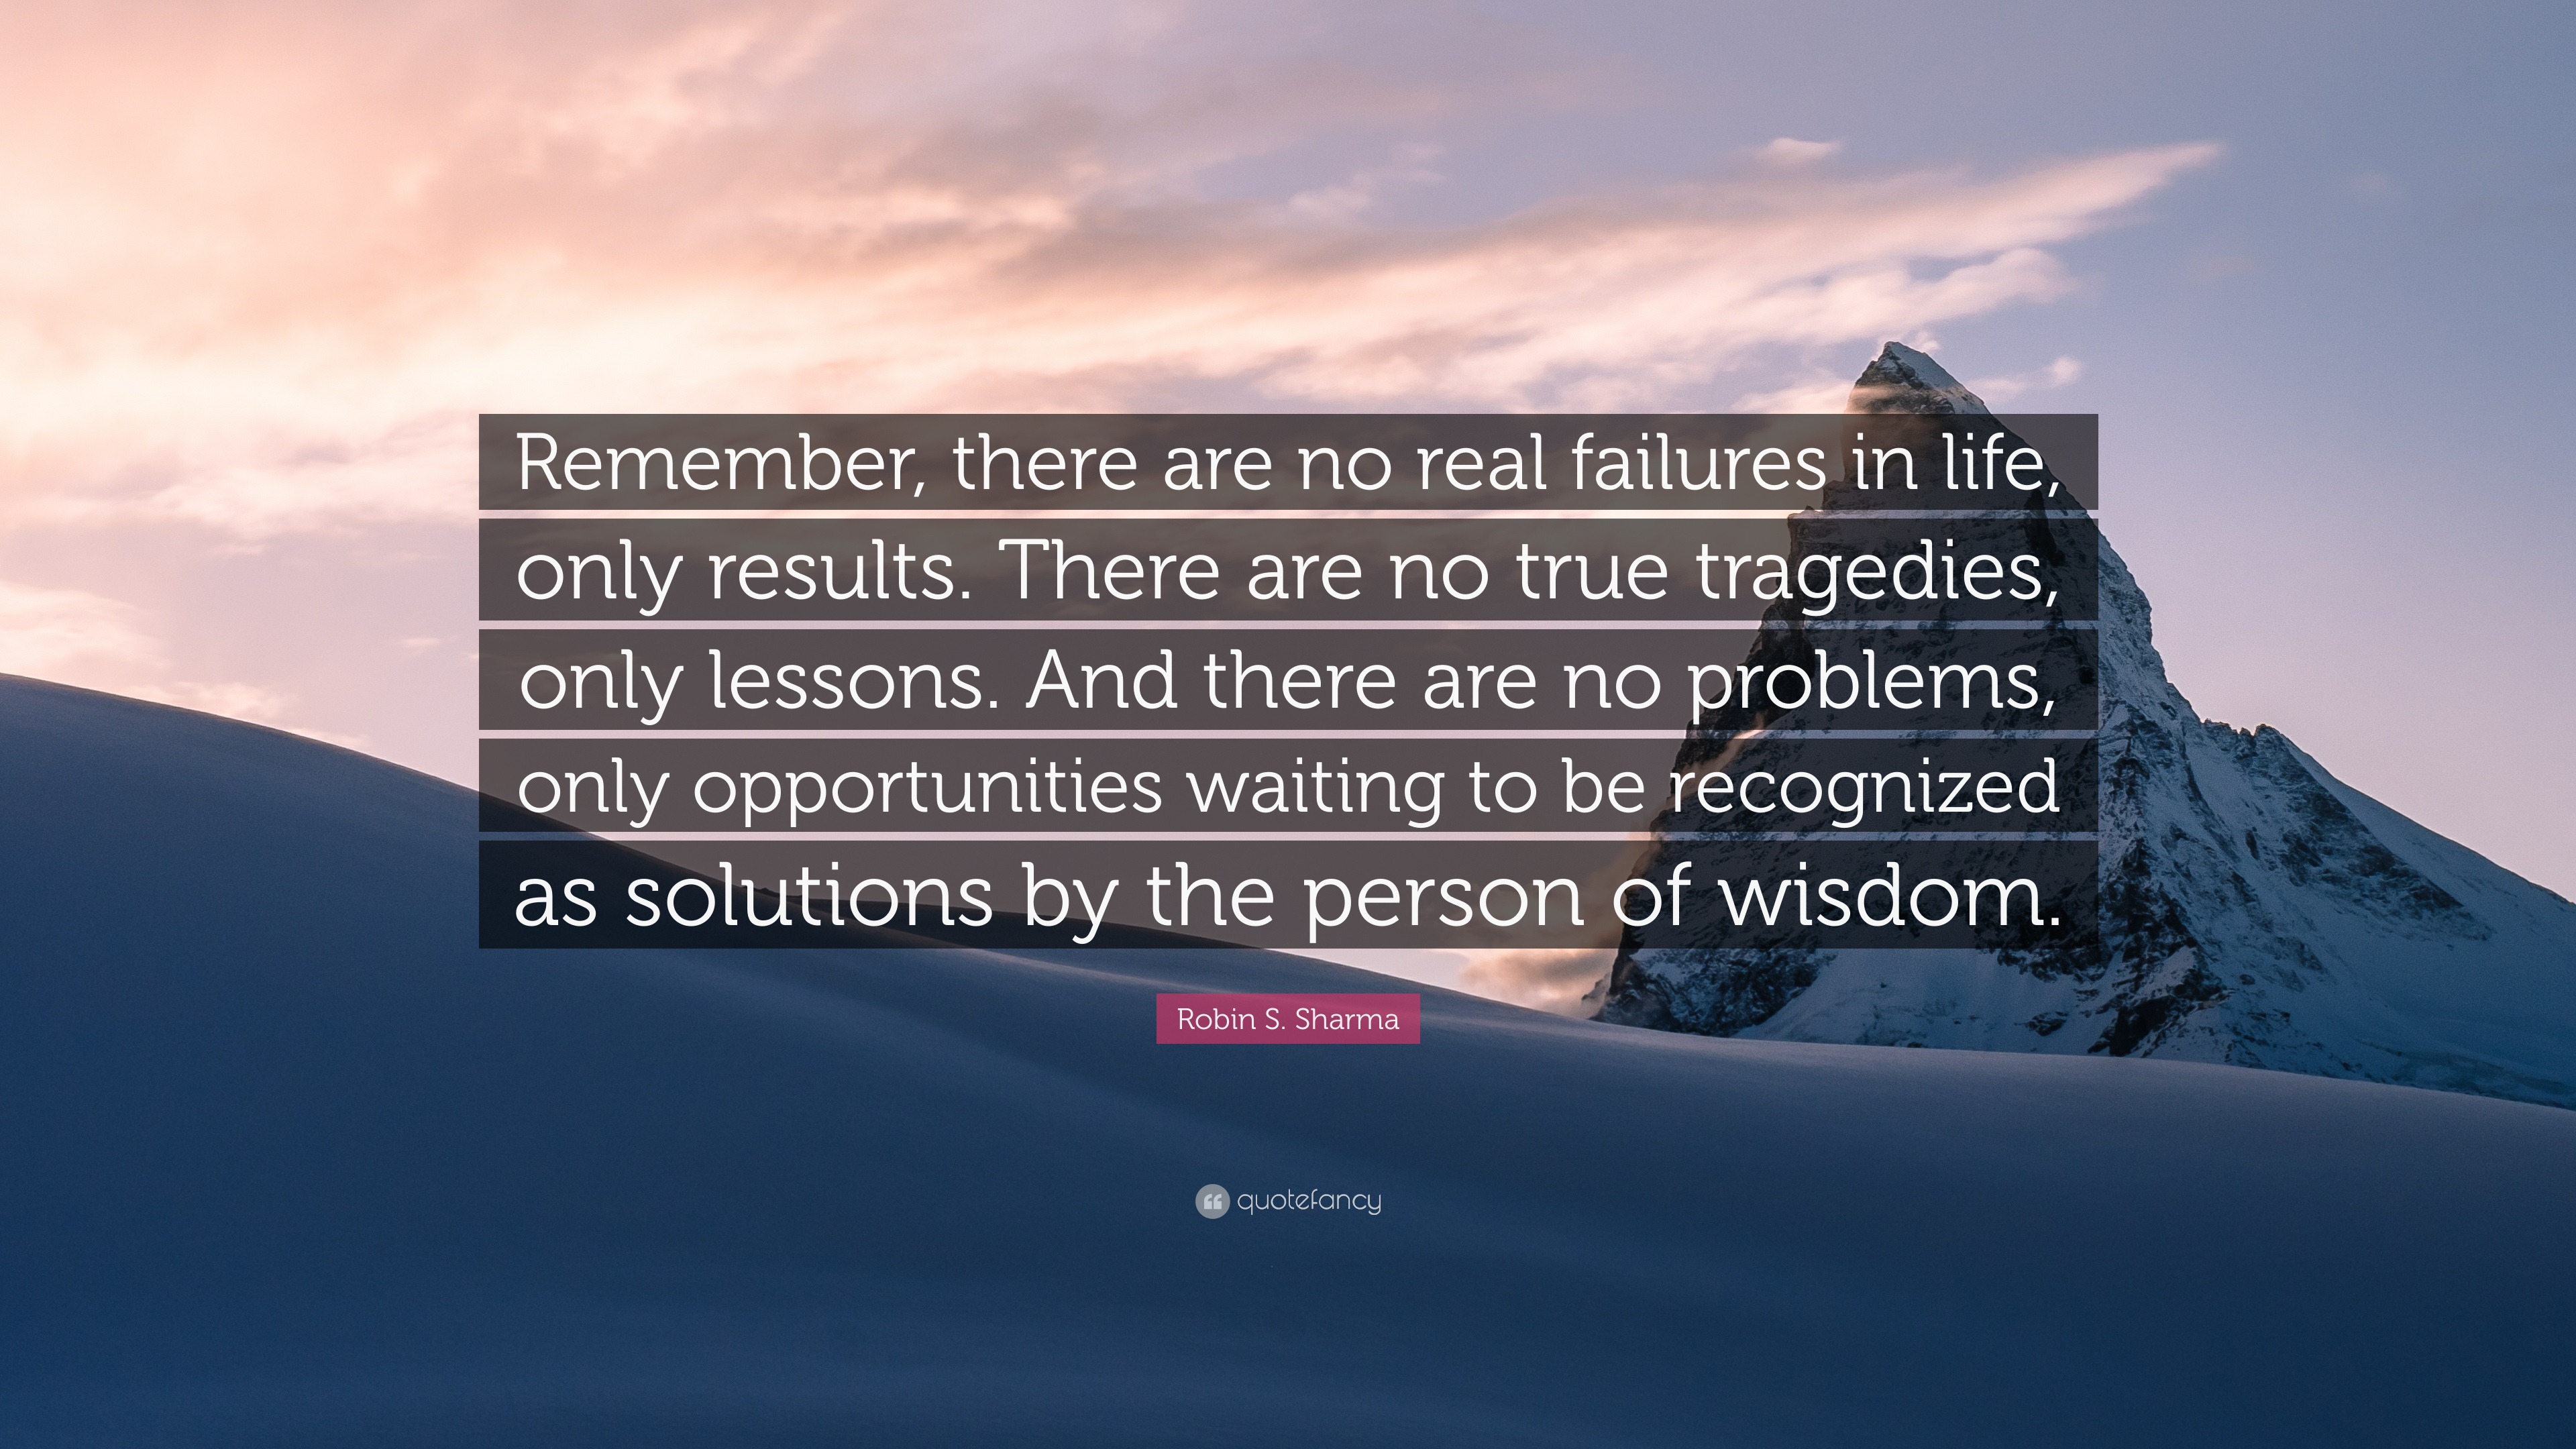 Robin S. Sharma Quote: “Remember, there are no real failures in life ...